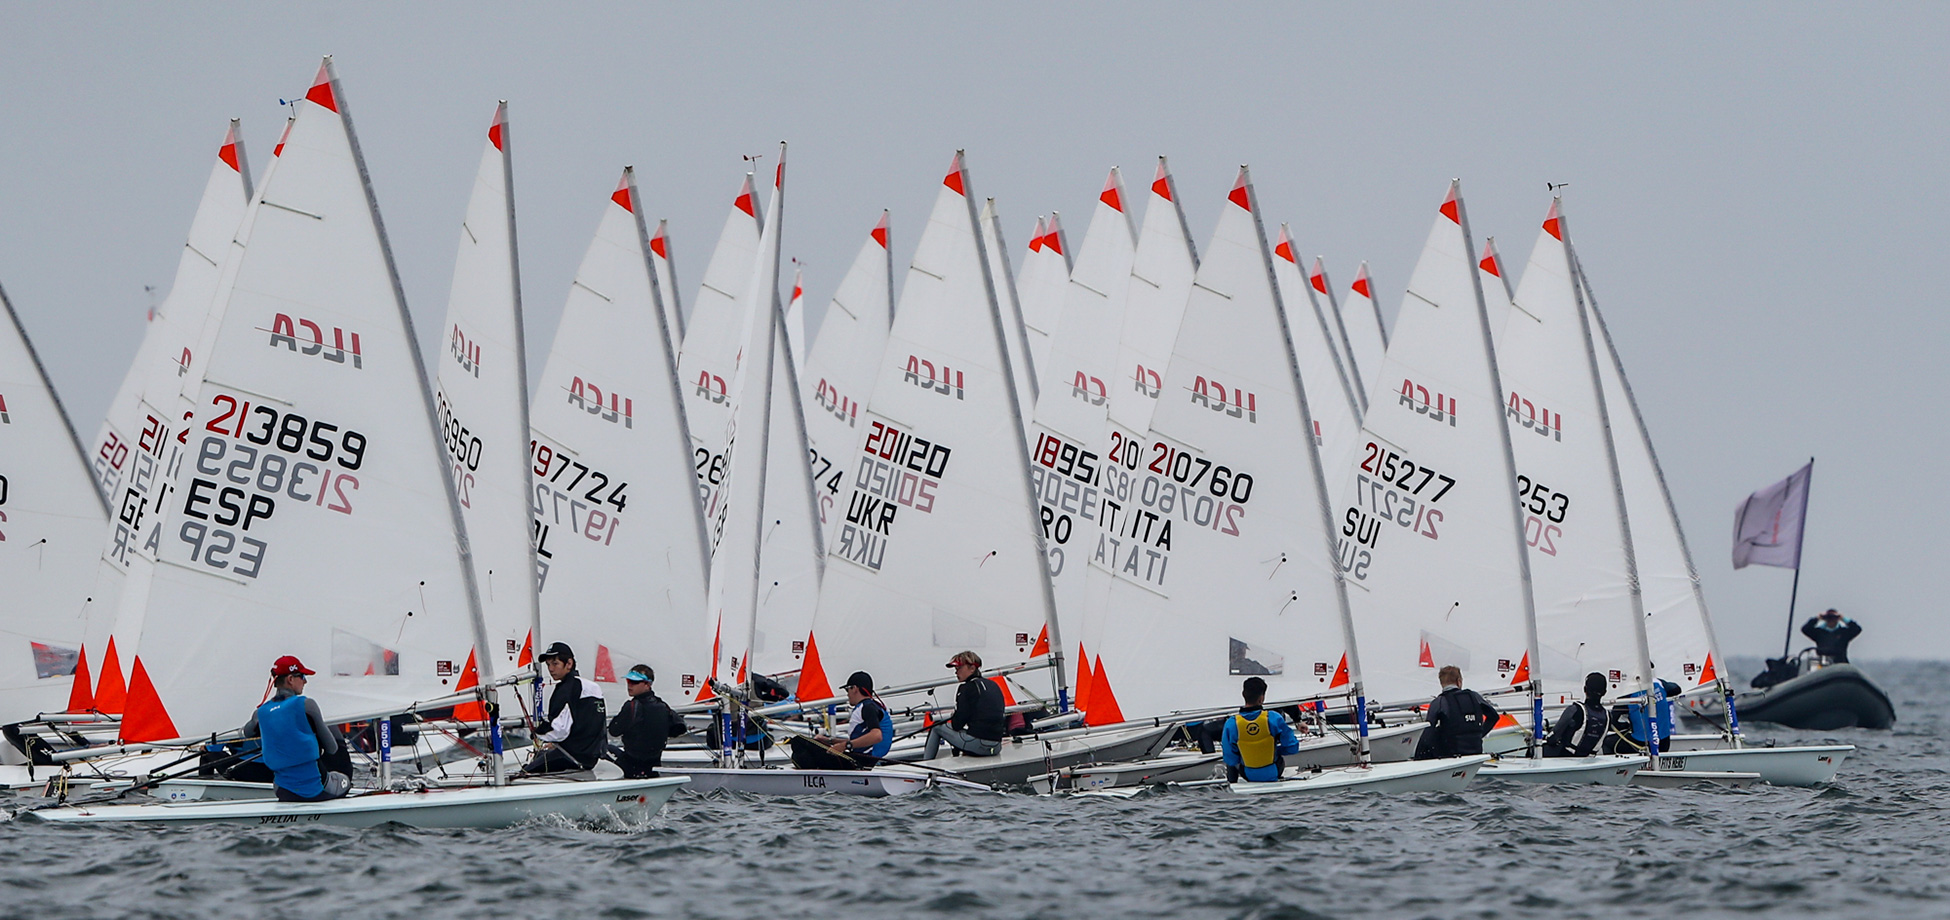 race day 1 4.7 youth europeans